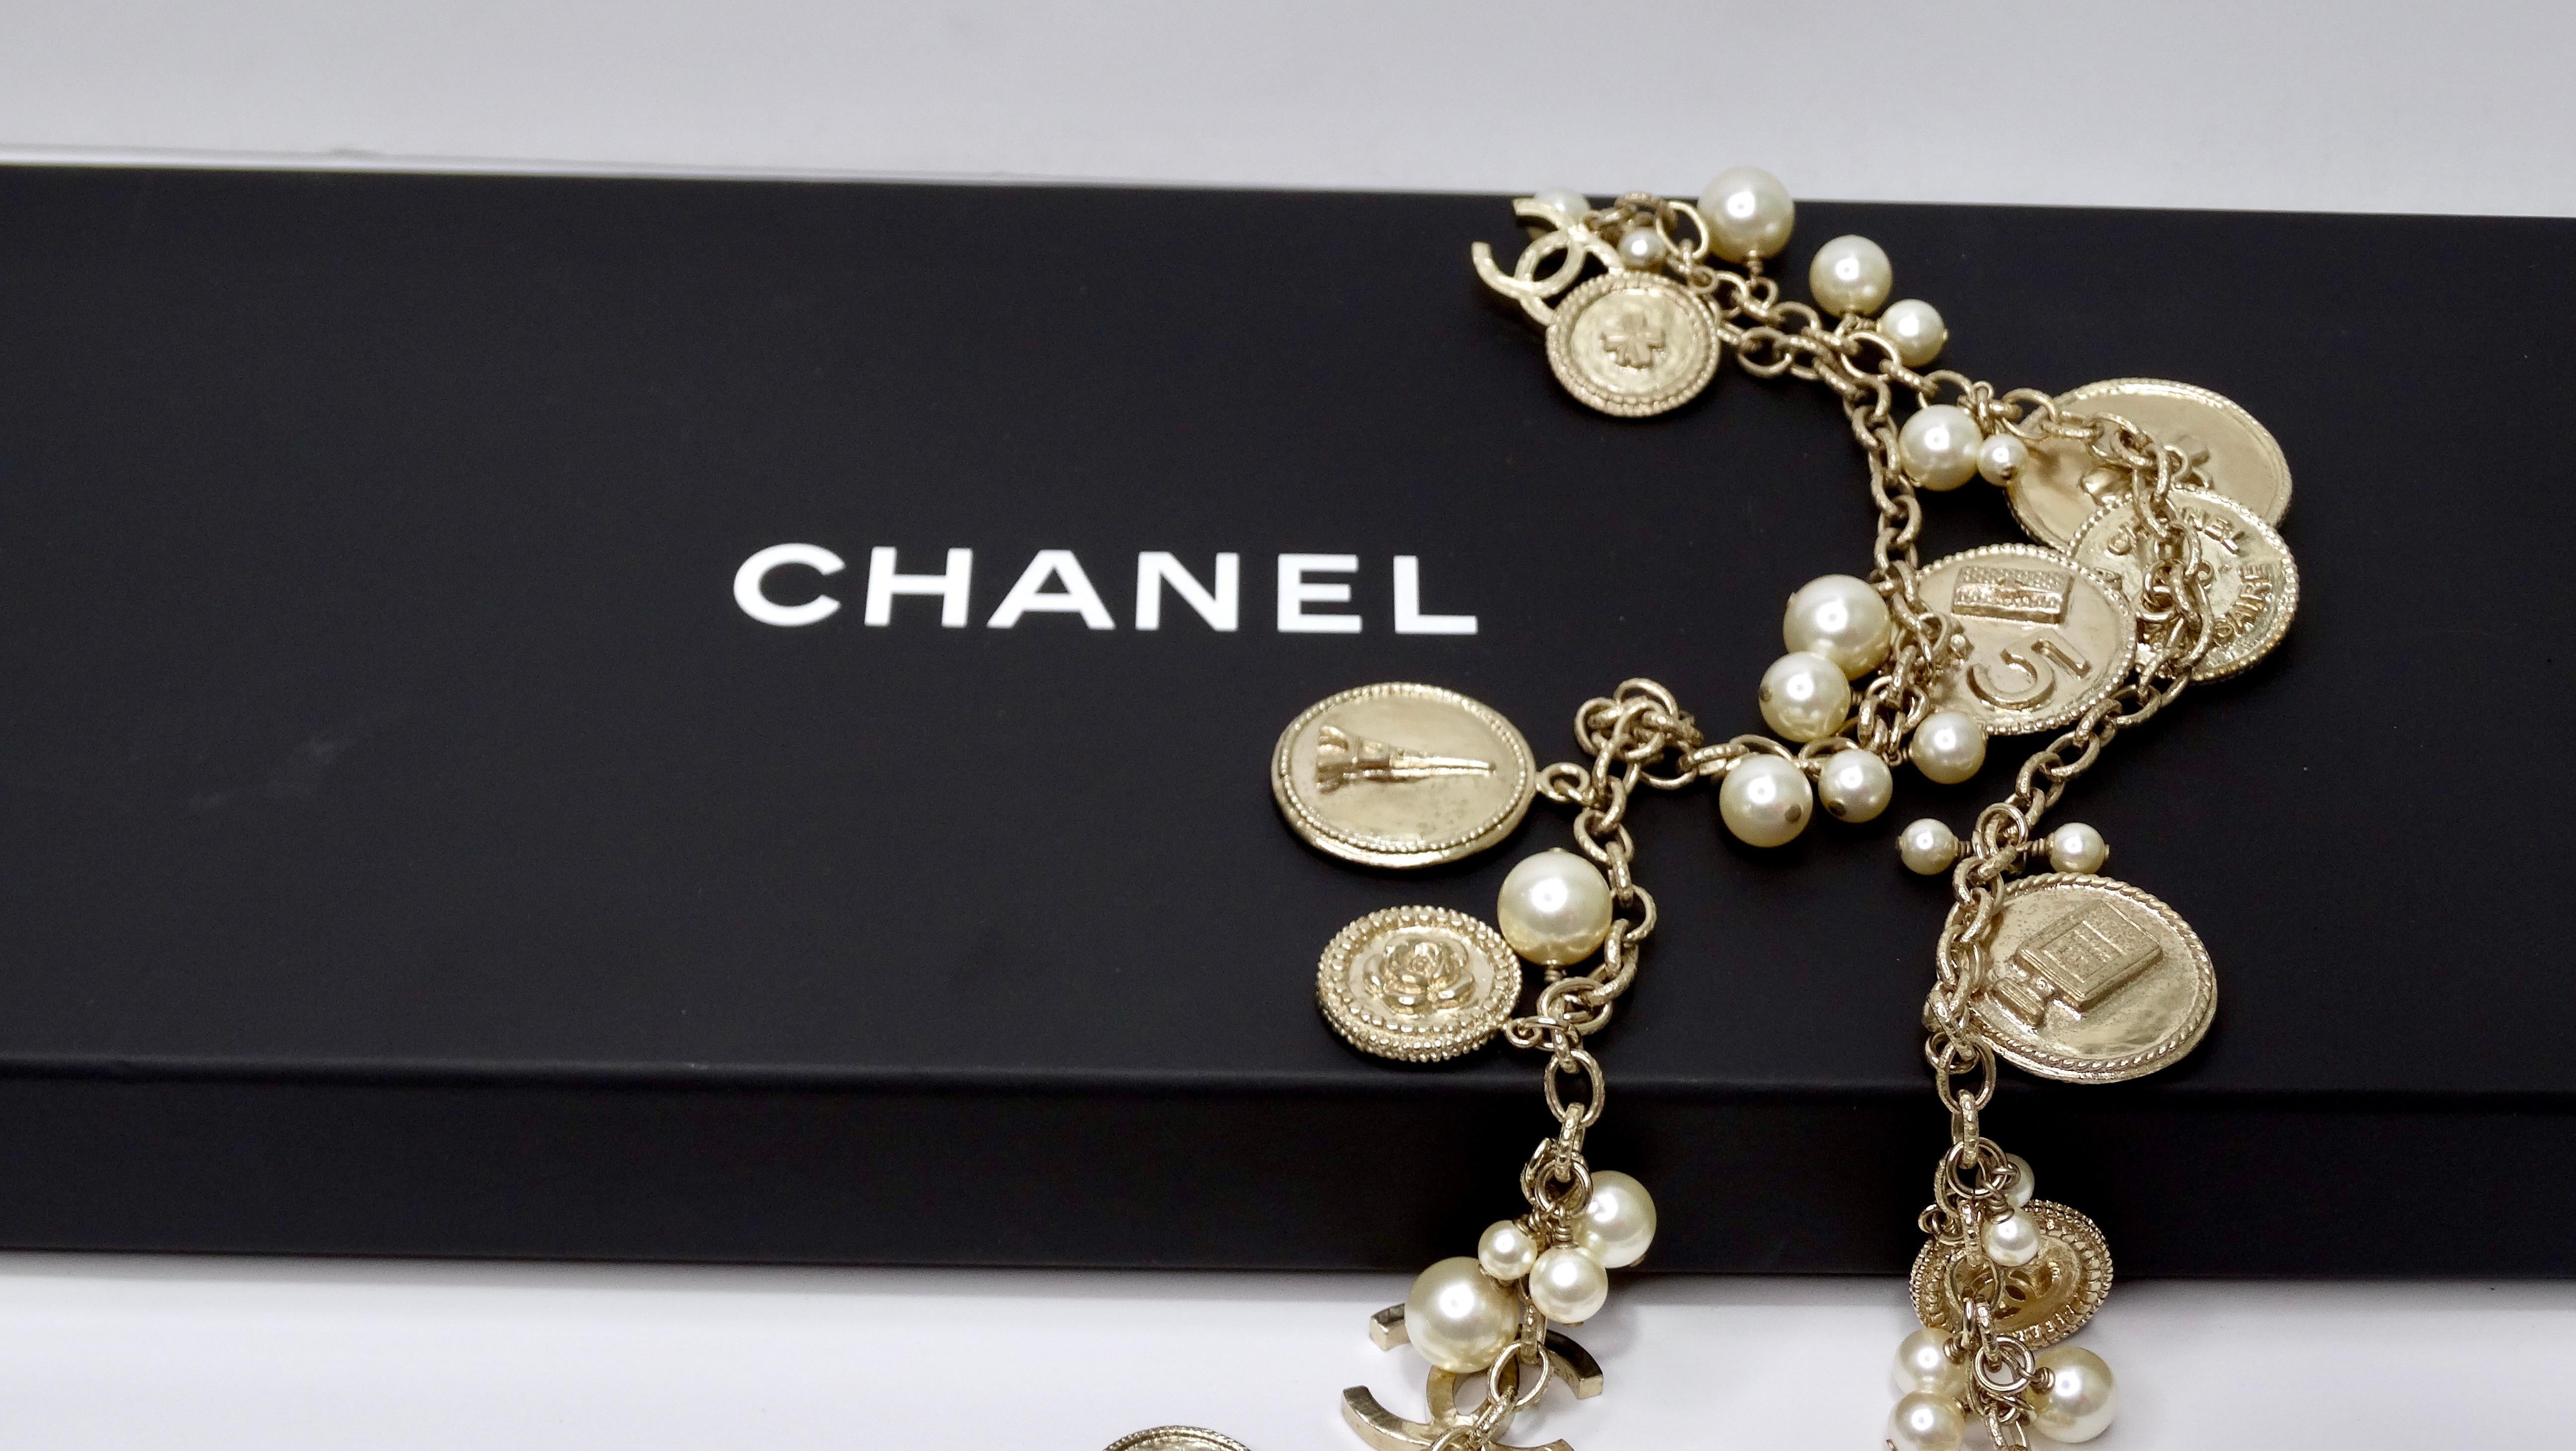 Get your piece of ultra-rare Chanel here! From the Chanel 100th Anniversary collection in the year 2014, this is a gem! A no-brainer!! It is in great condition with no notable flaws. This necklace is featured in a vibrant light gold-tone metal